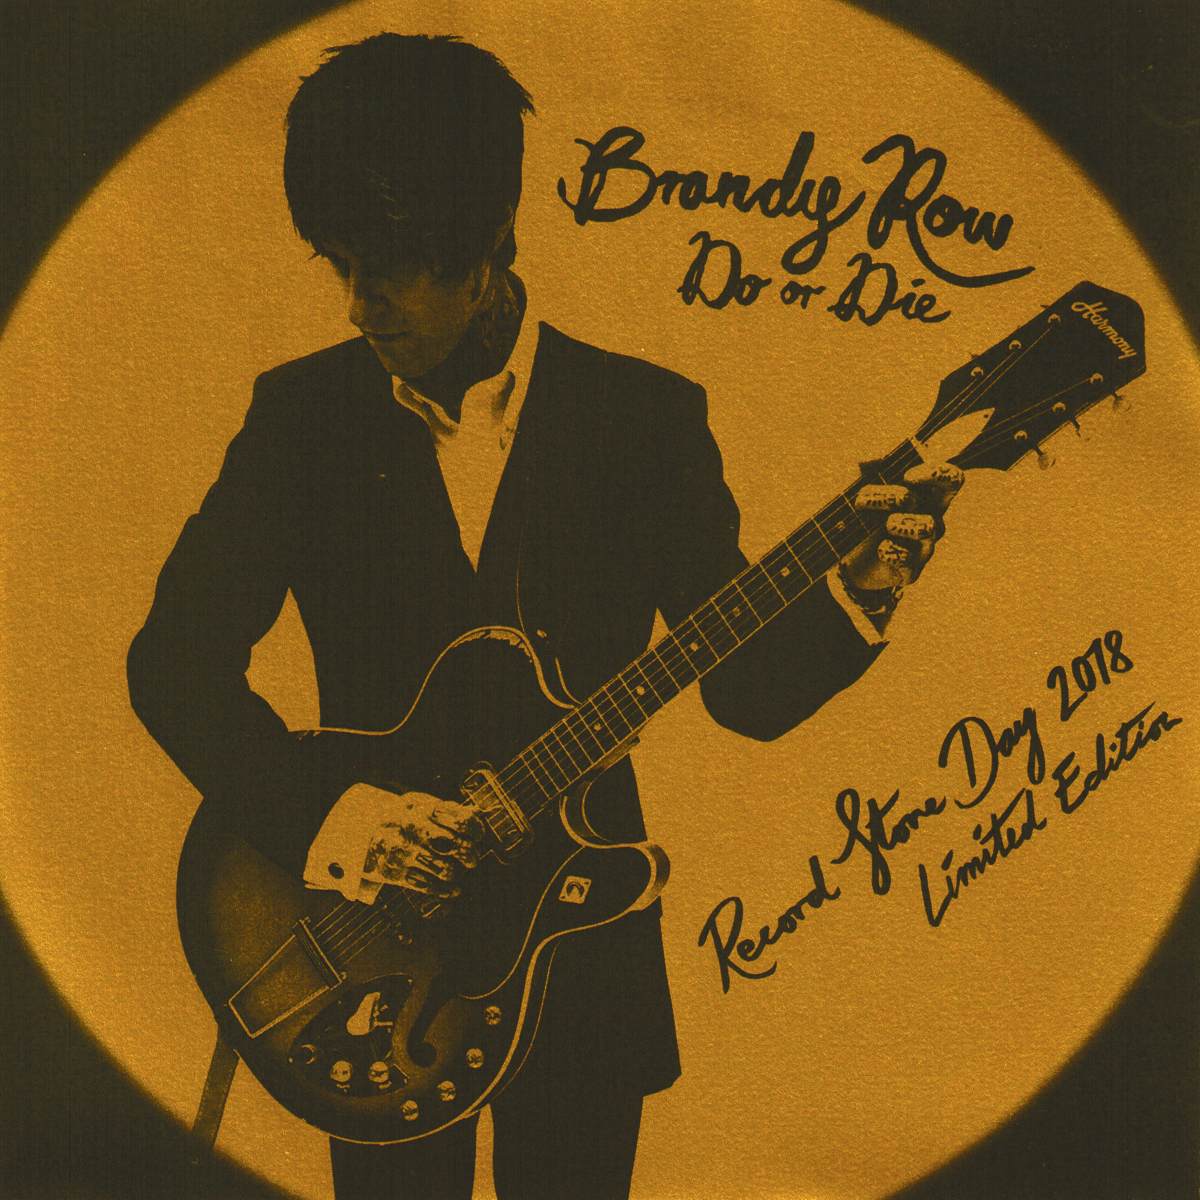 Brandy Row- Do Or Die 7” ~RAREST COVER LTD TO 25 NUMBERED COPIES!